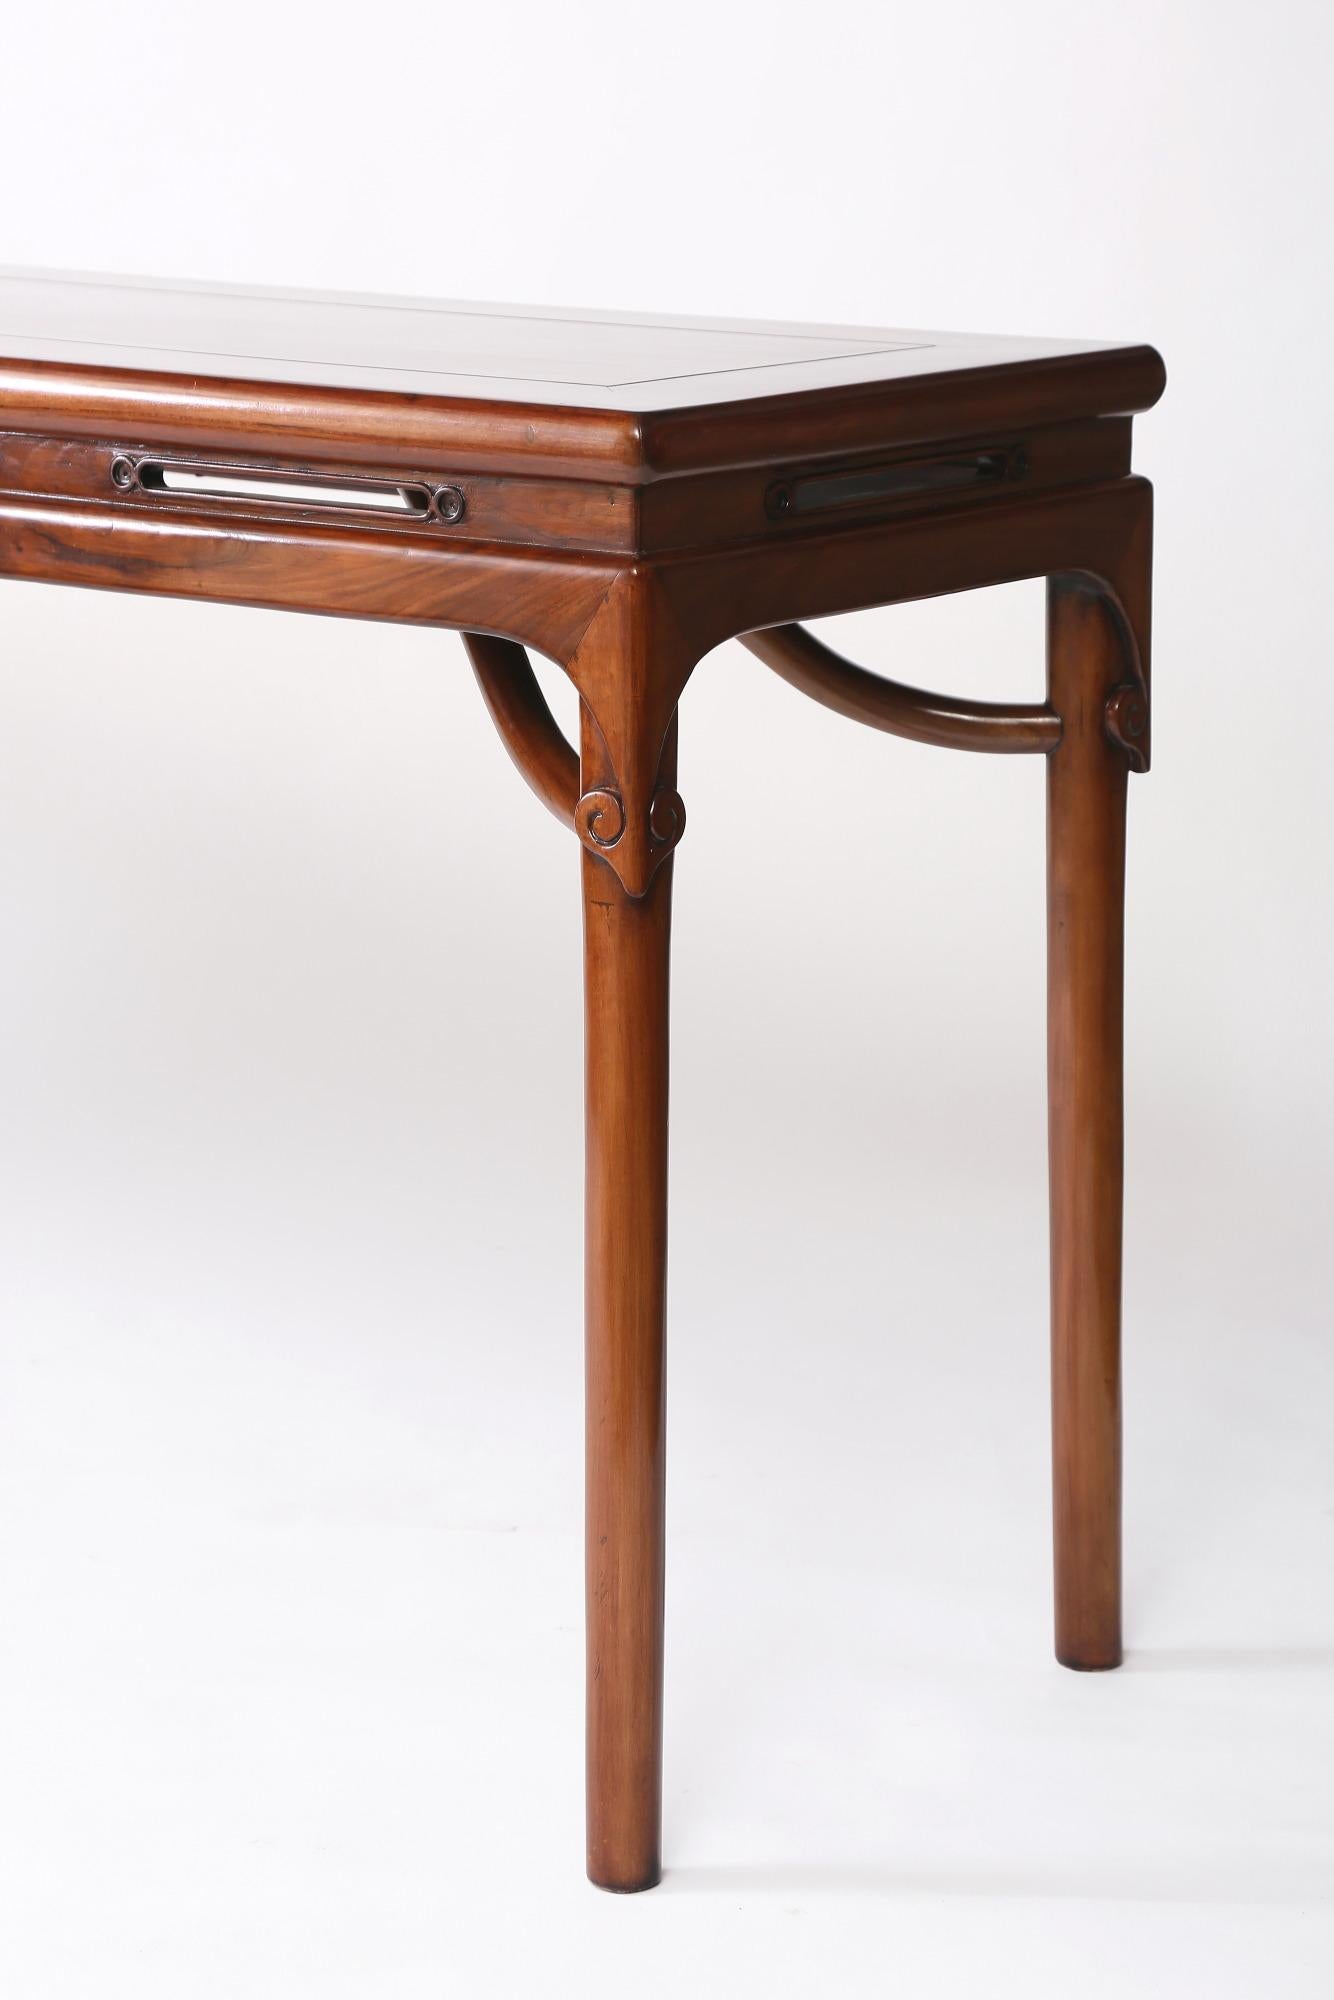 Hand-Crafted Antique Chinese Table with Pierced Waist and S-Curve Braces, Ming Style